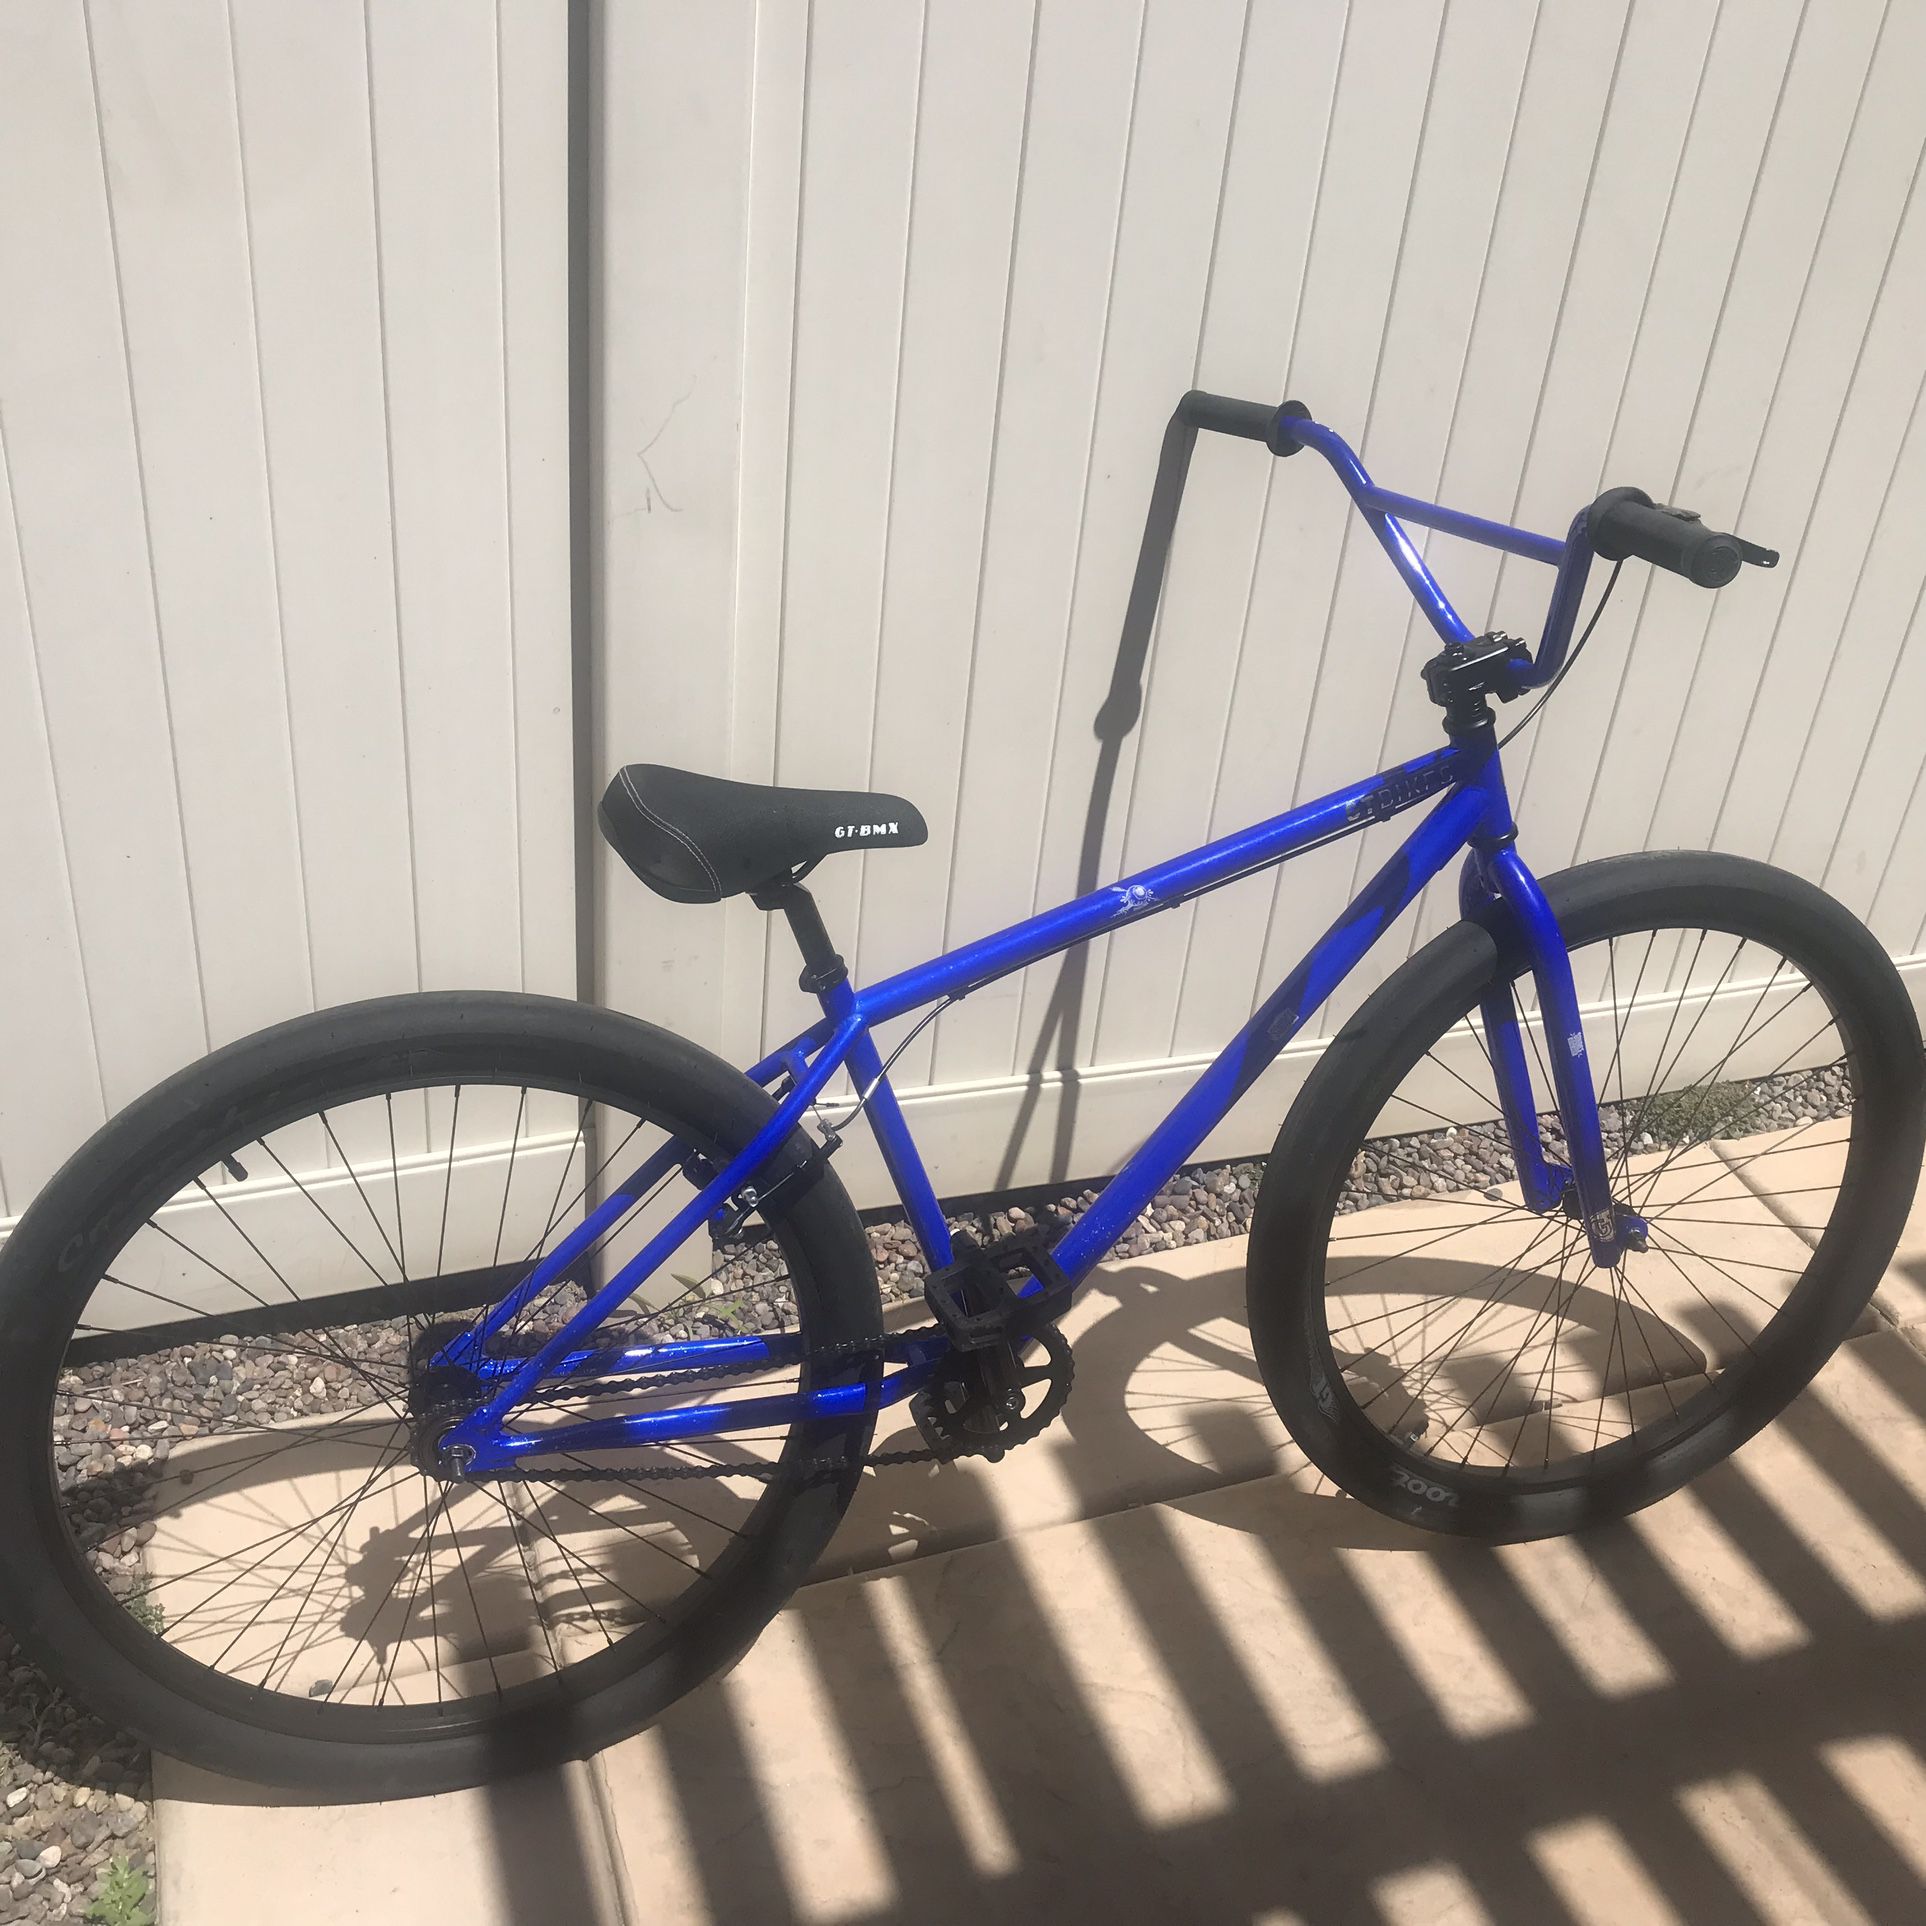 Bicycle 29 Inch Gt Performer From City Grounds Bmx Big Bike 